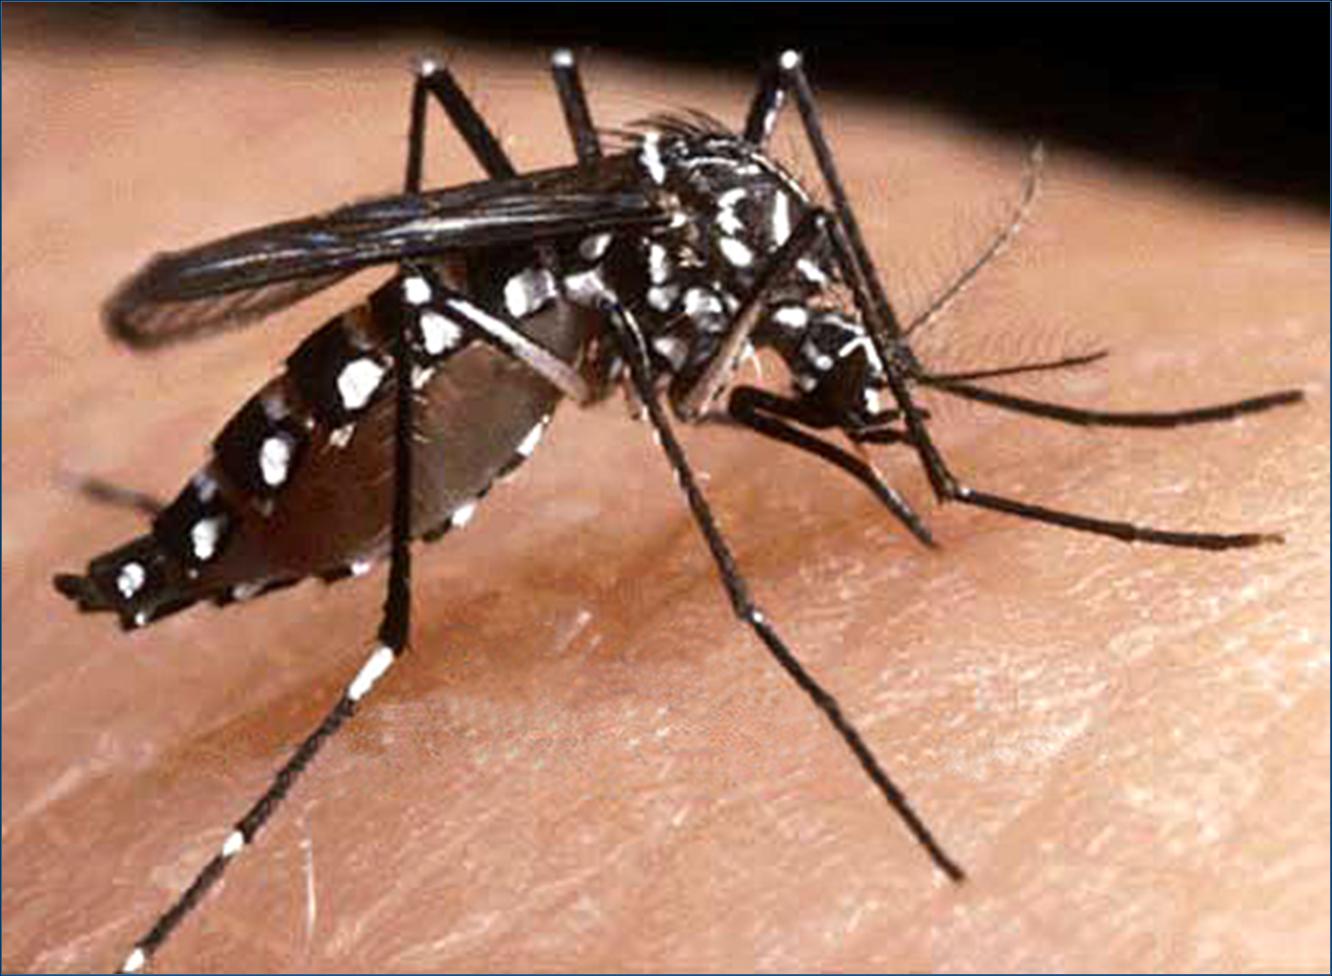 Kolkata private labs under legal scanner for cheating on dengue tests